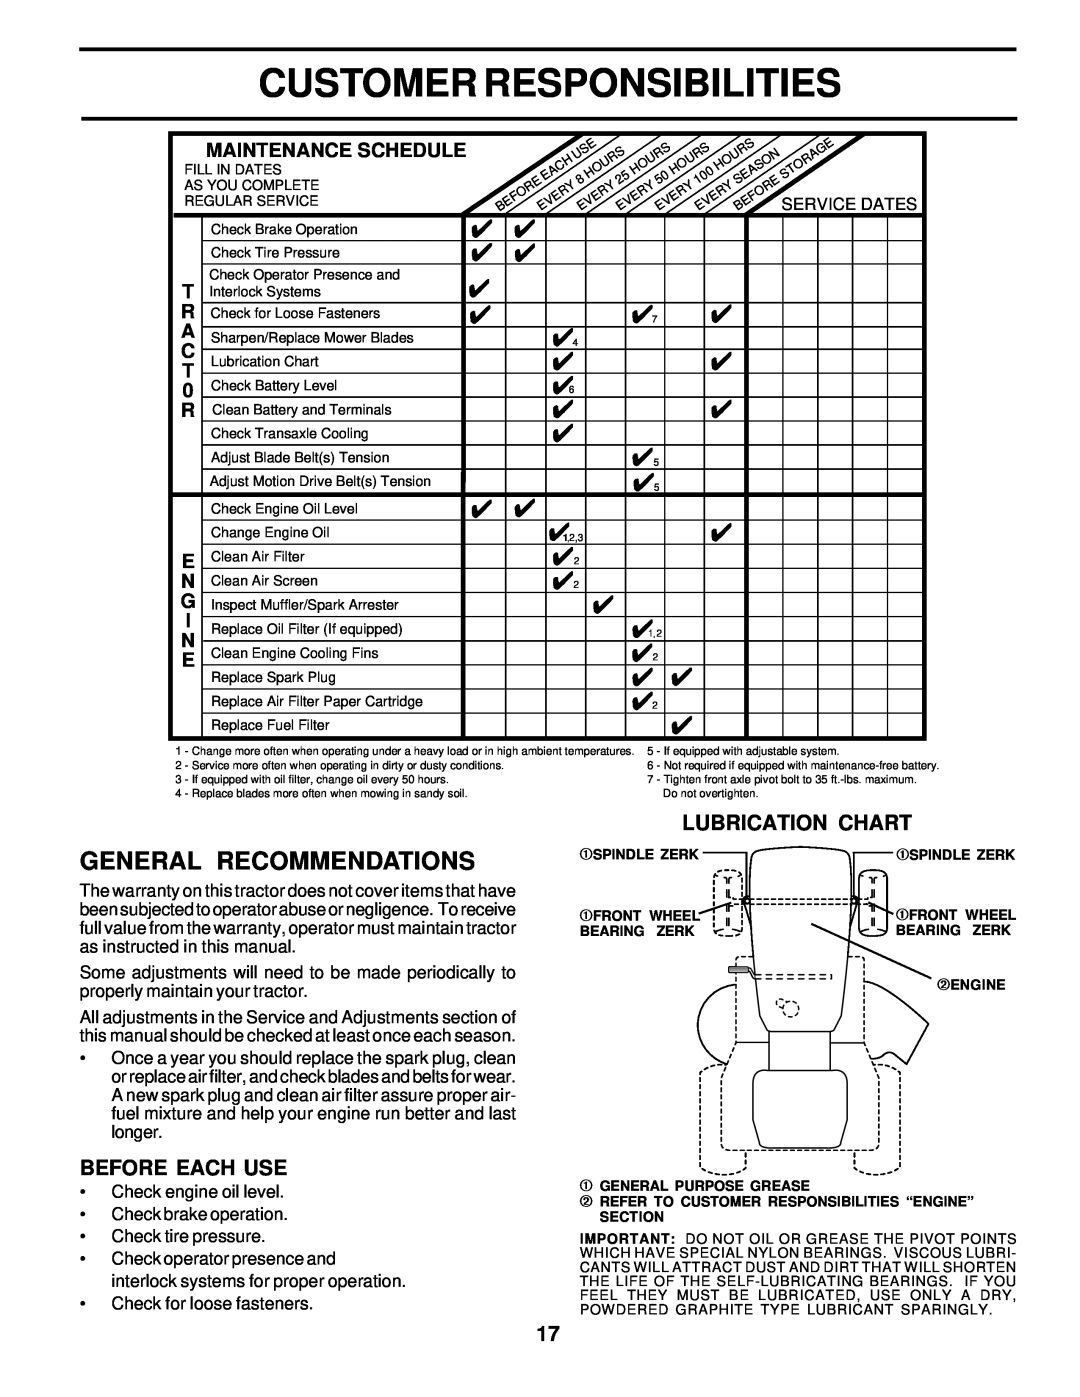 Poulan 178249 Customer Responsibilities, General Recommendations, Before Each Use, Lubrication Chart, Maintenance Schedule 